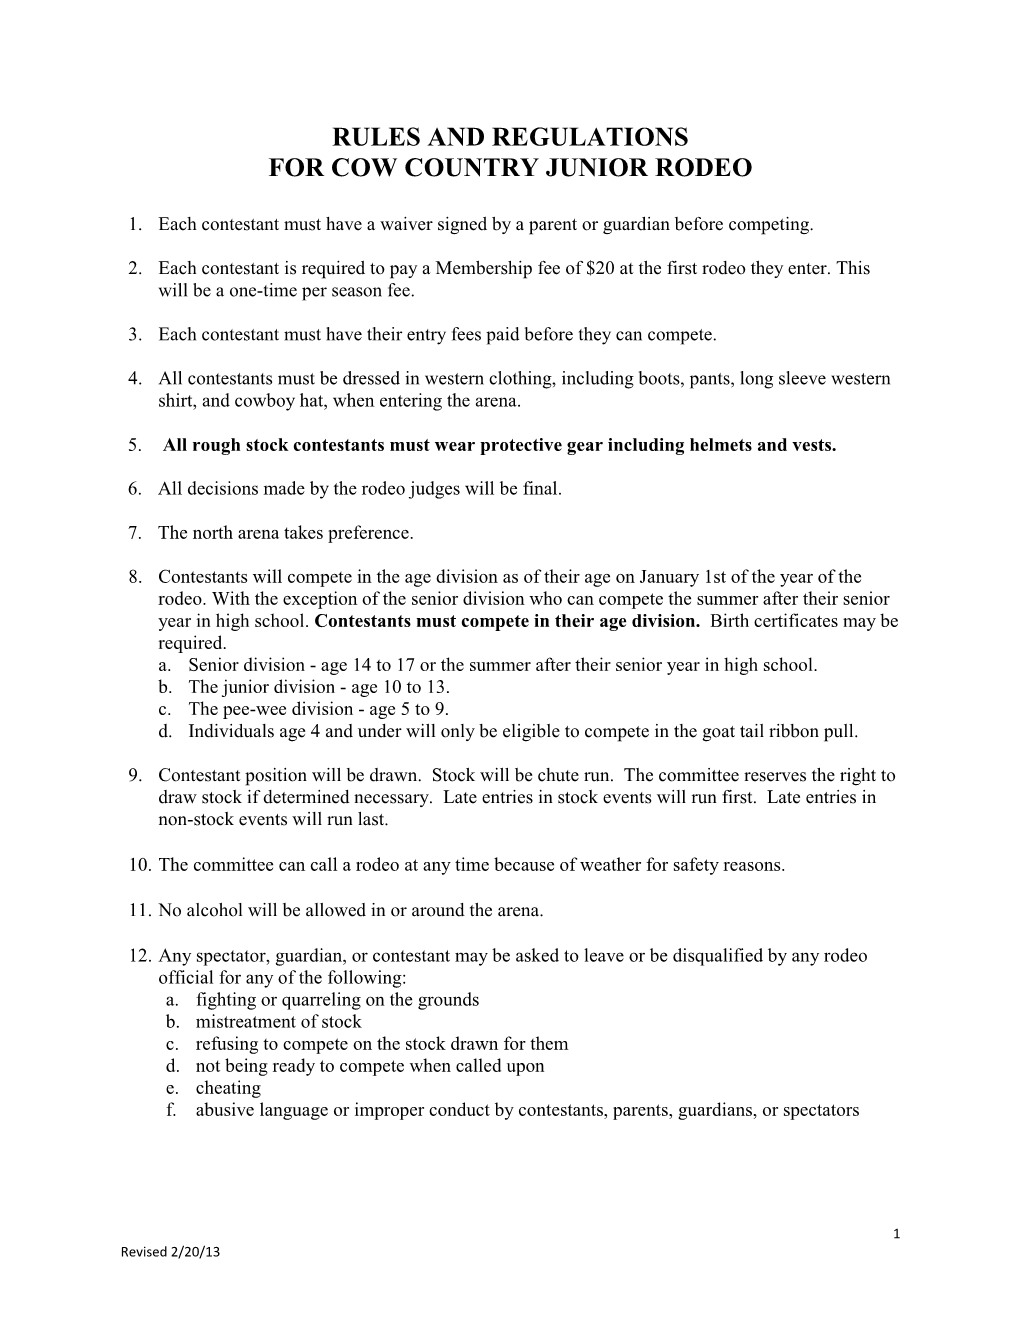 Rules and Regulations for Cow Country Junior Rodeo